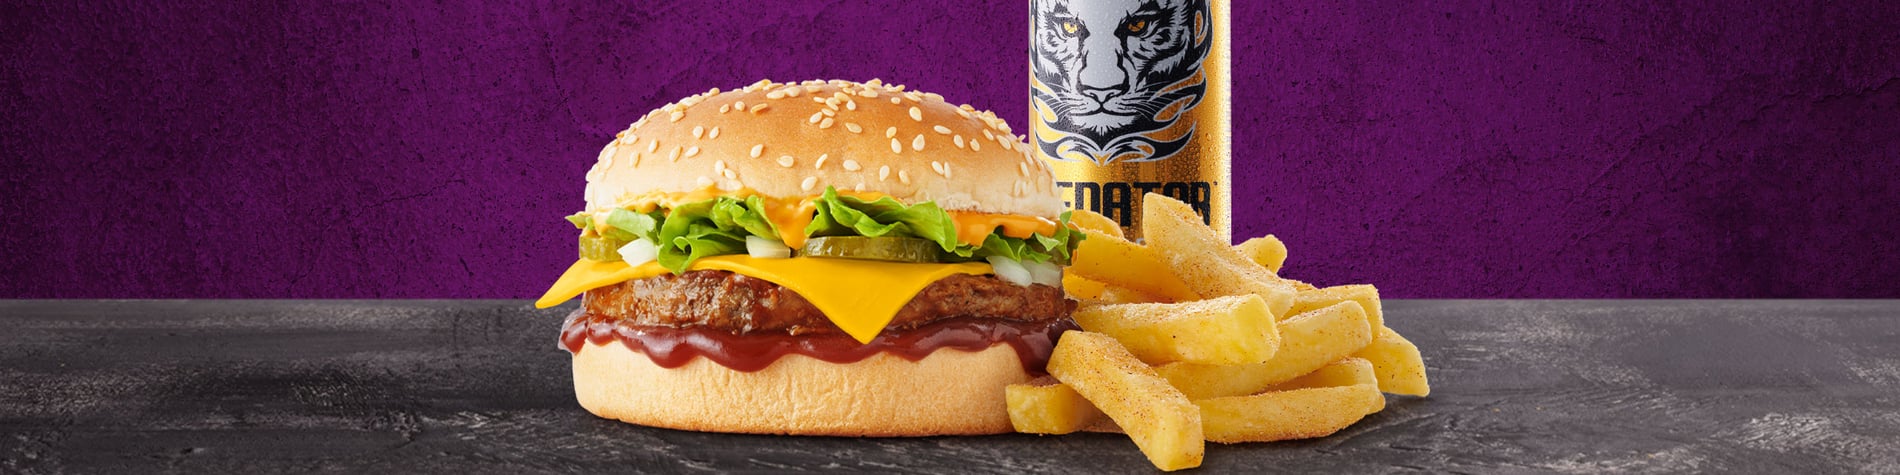 Steers® burger special called the Azishe Meal. It’s a Halaal cheeseburger and chips combo with a FREE Power Play Energy Drink.